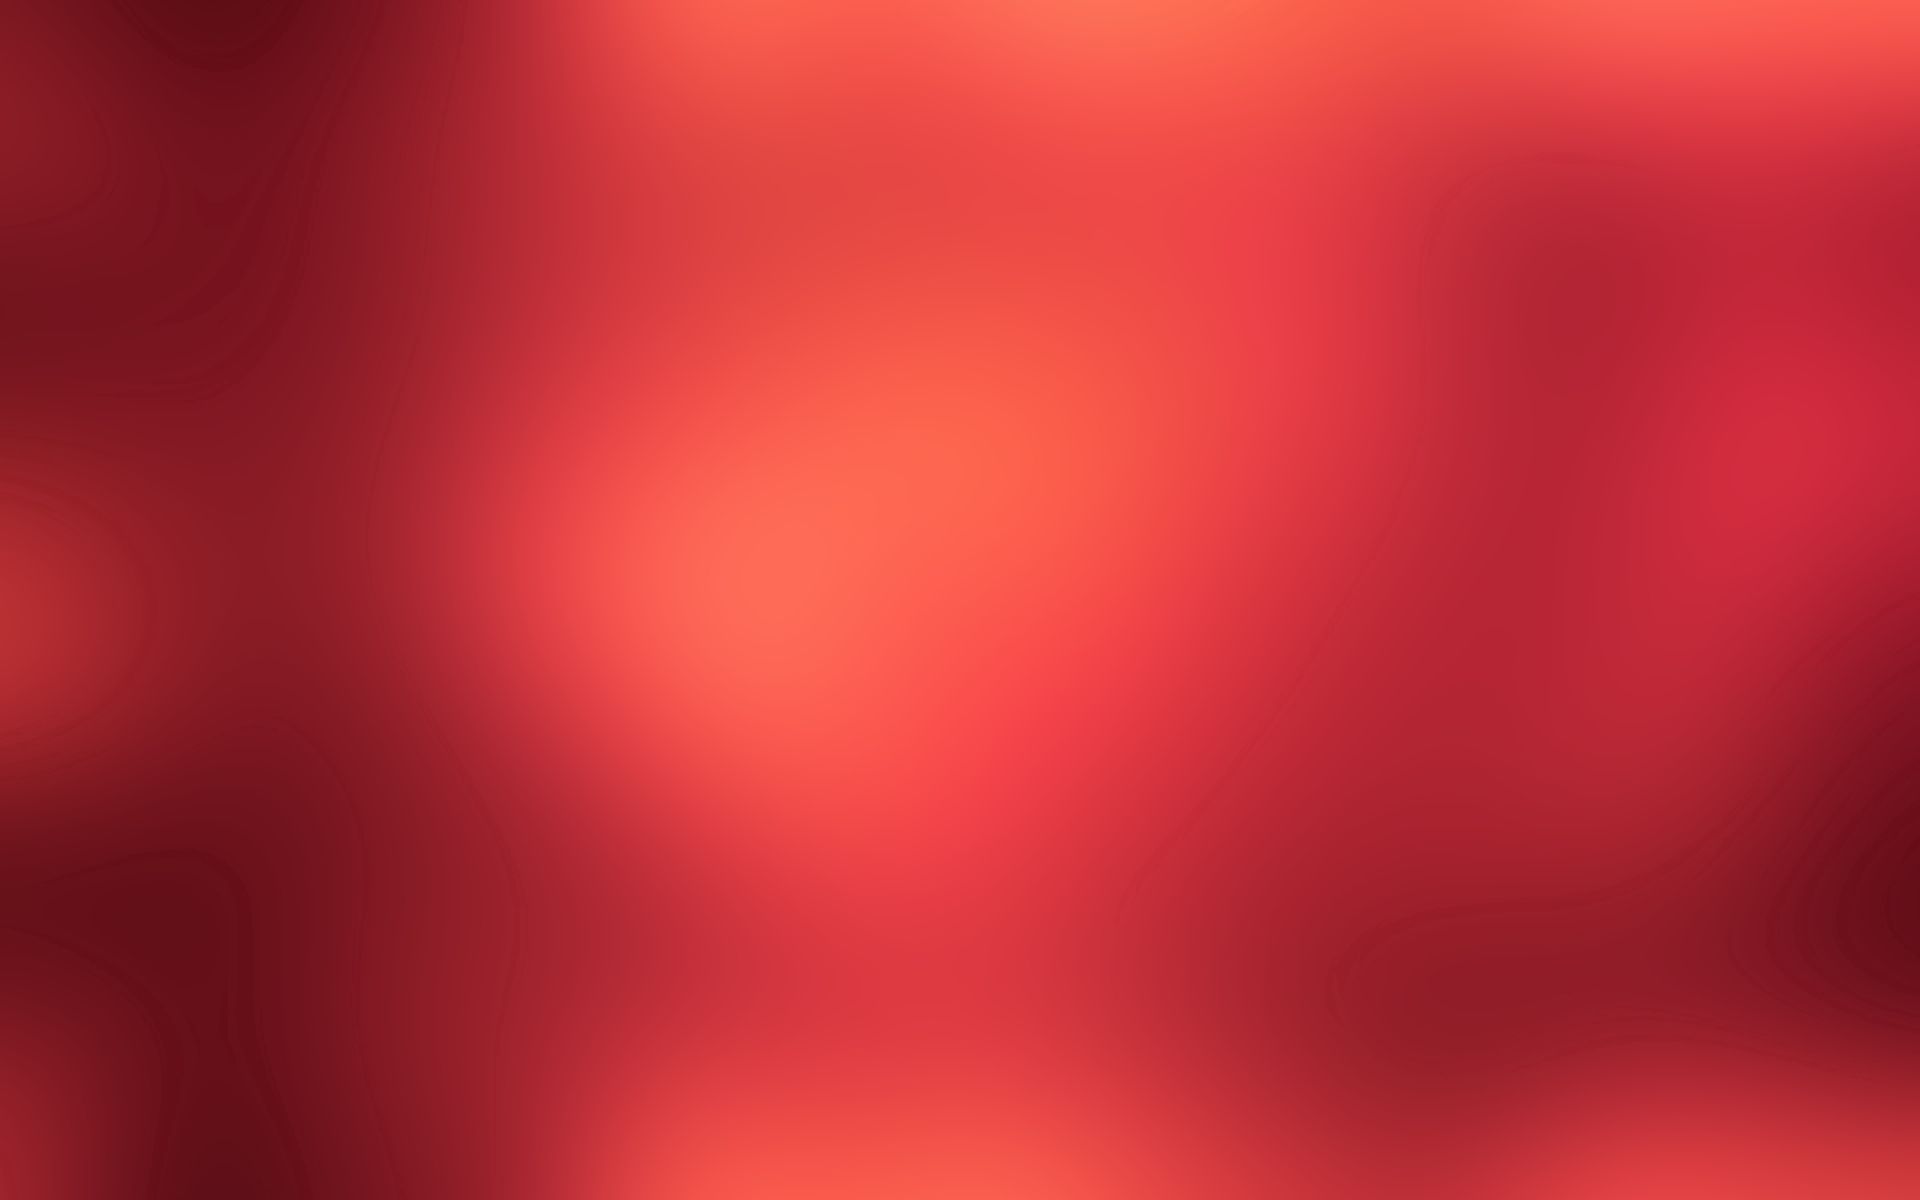 76379 download wallpaper solid, abstract, red, shine, bright, brilliance screensavers and pictures for free